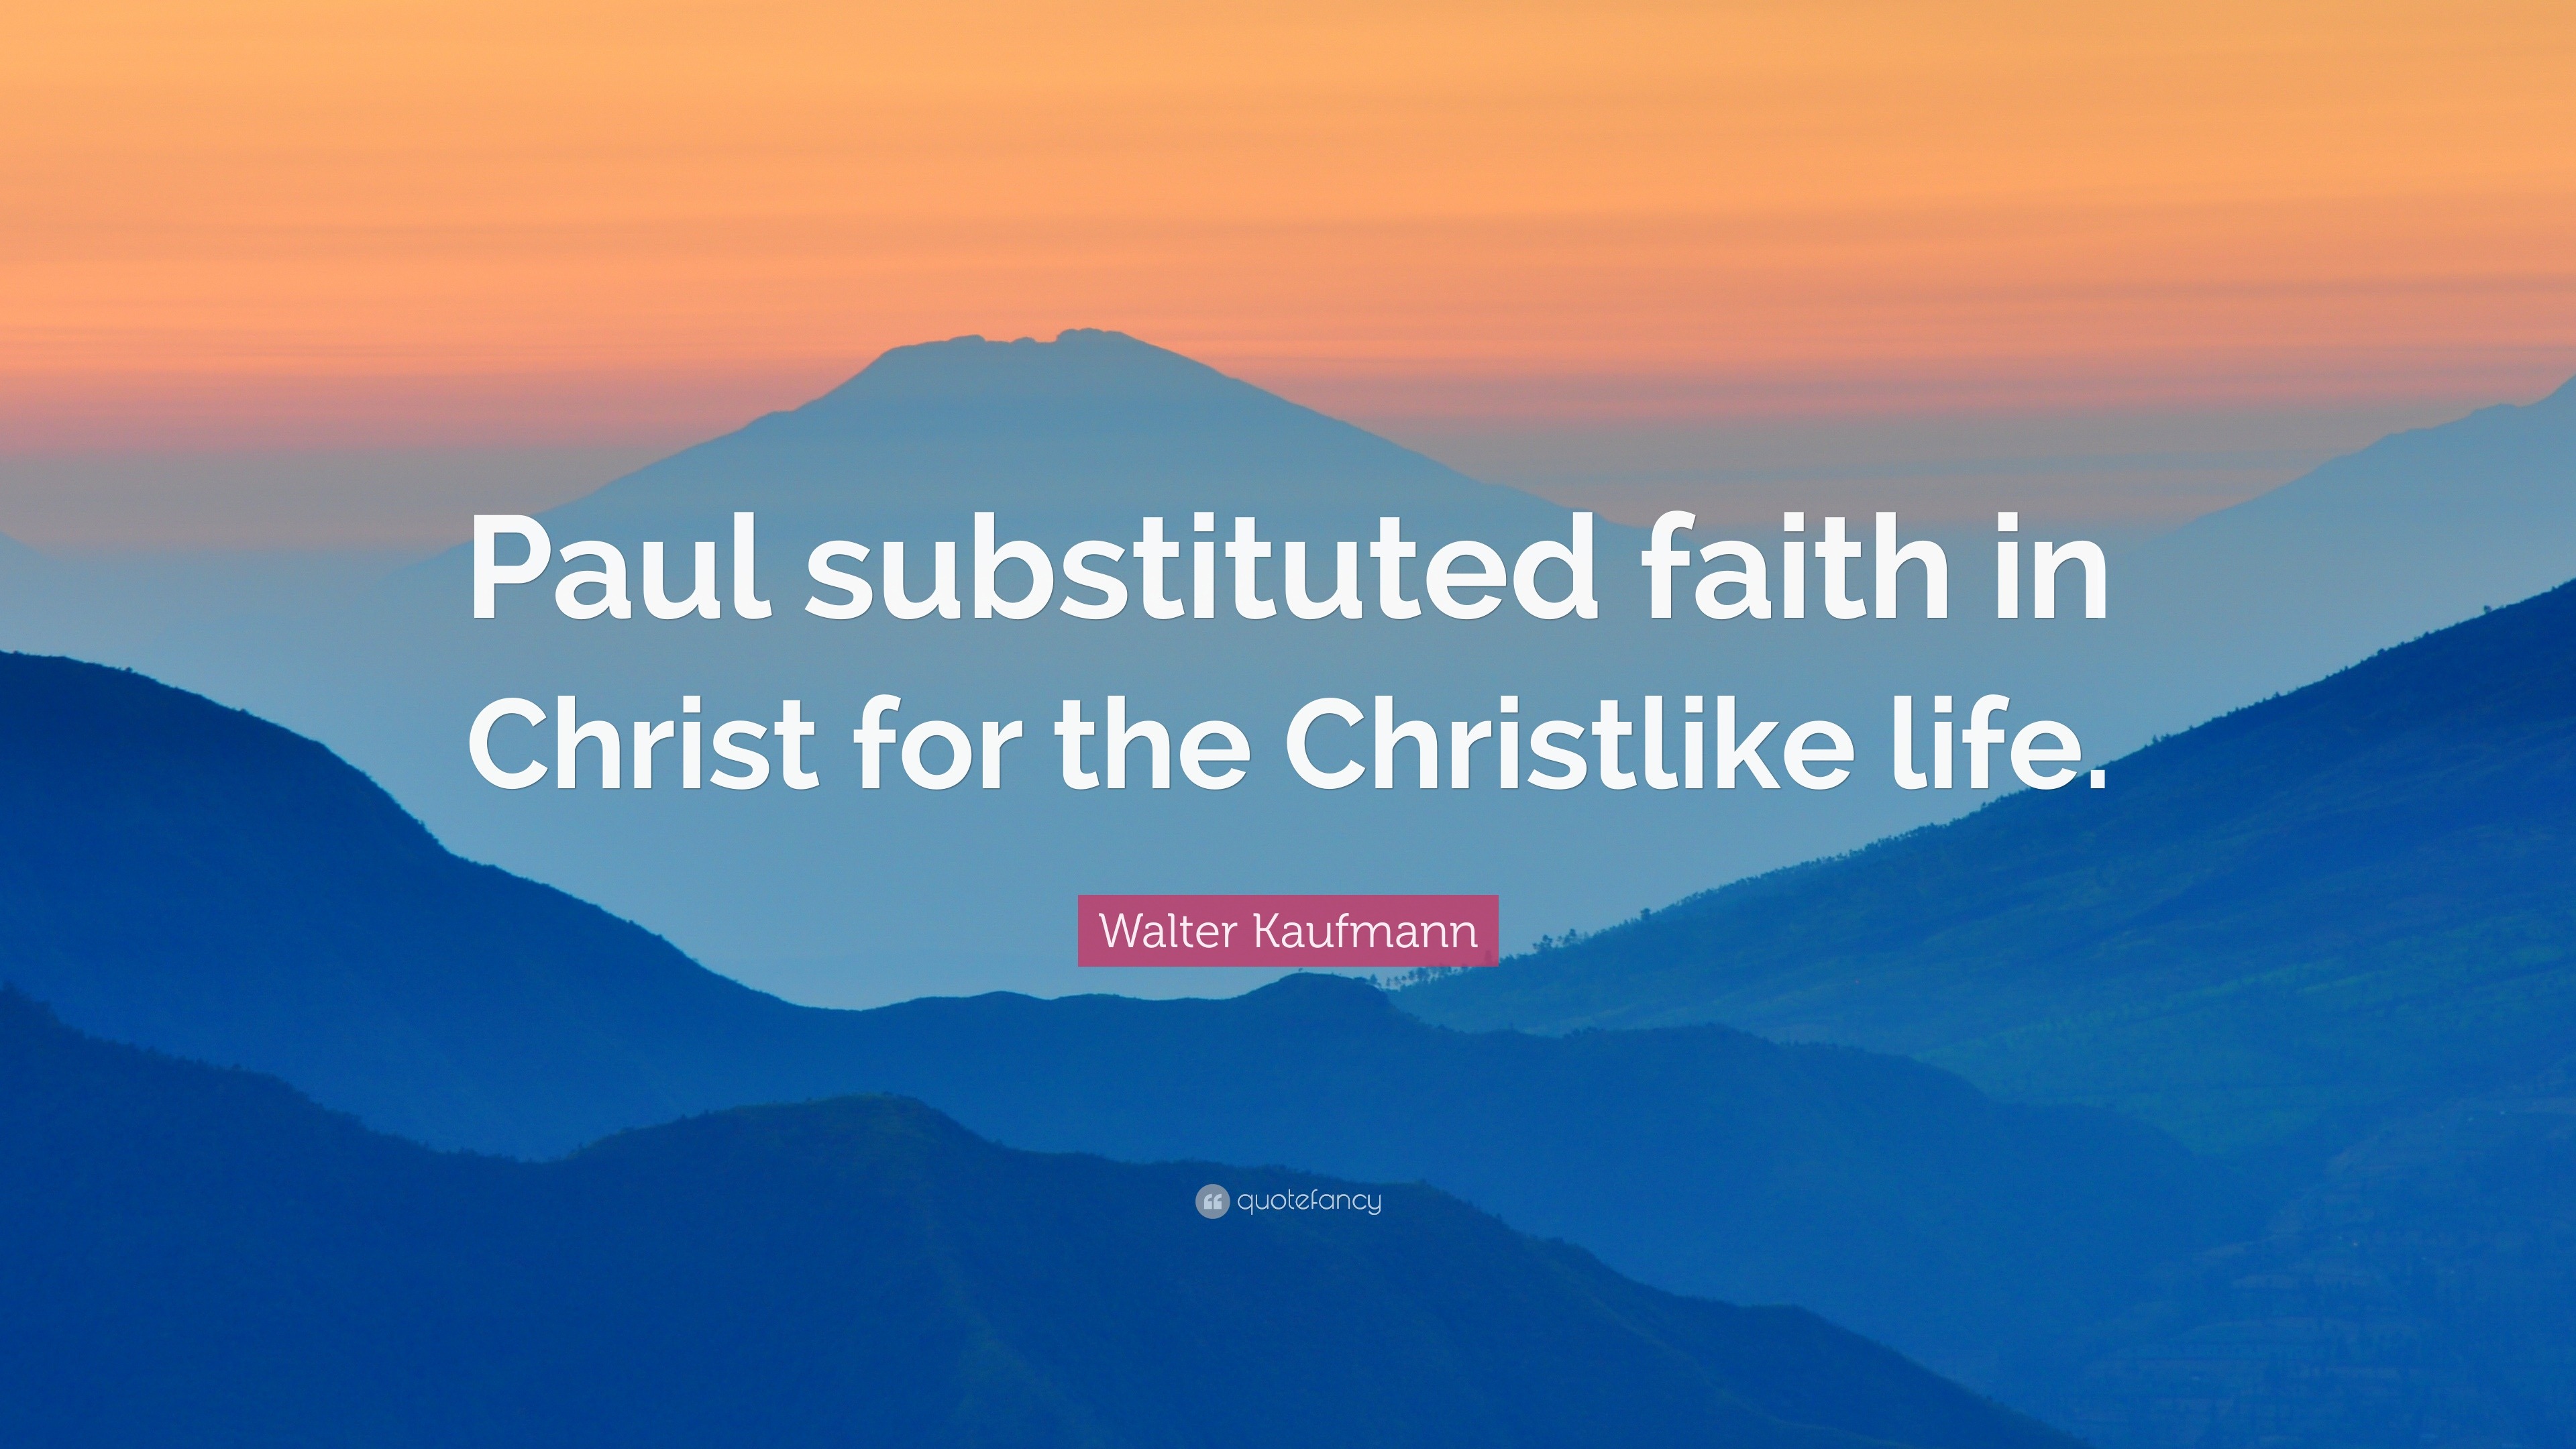 download walter kaufmann faith of a heretic